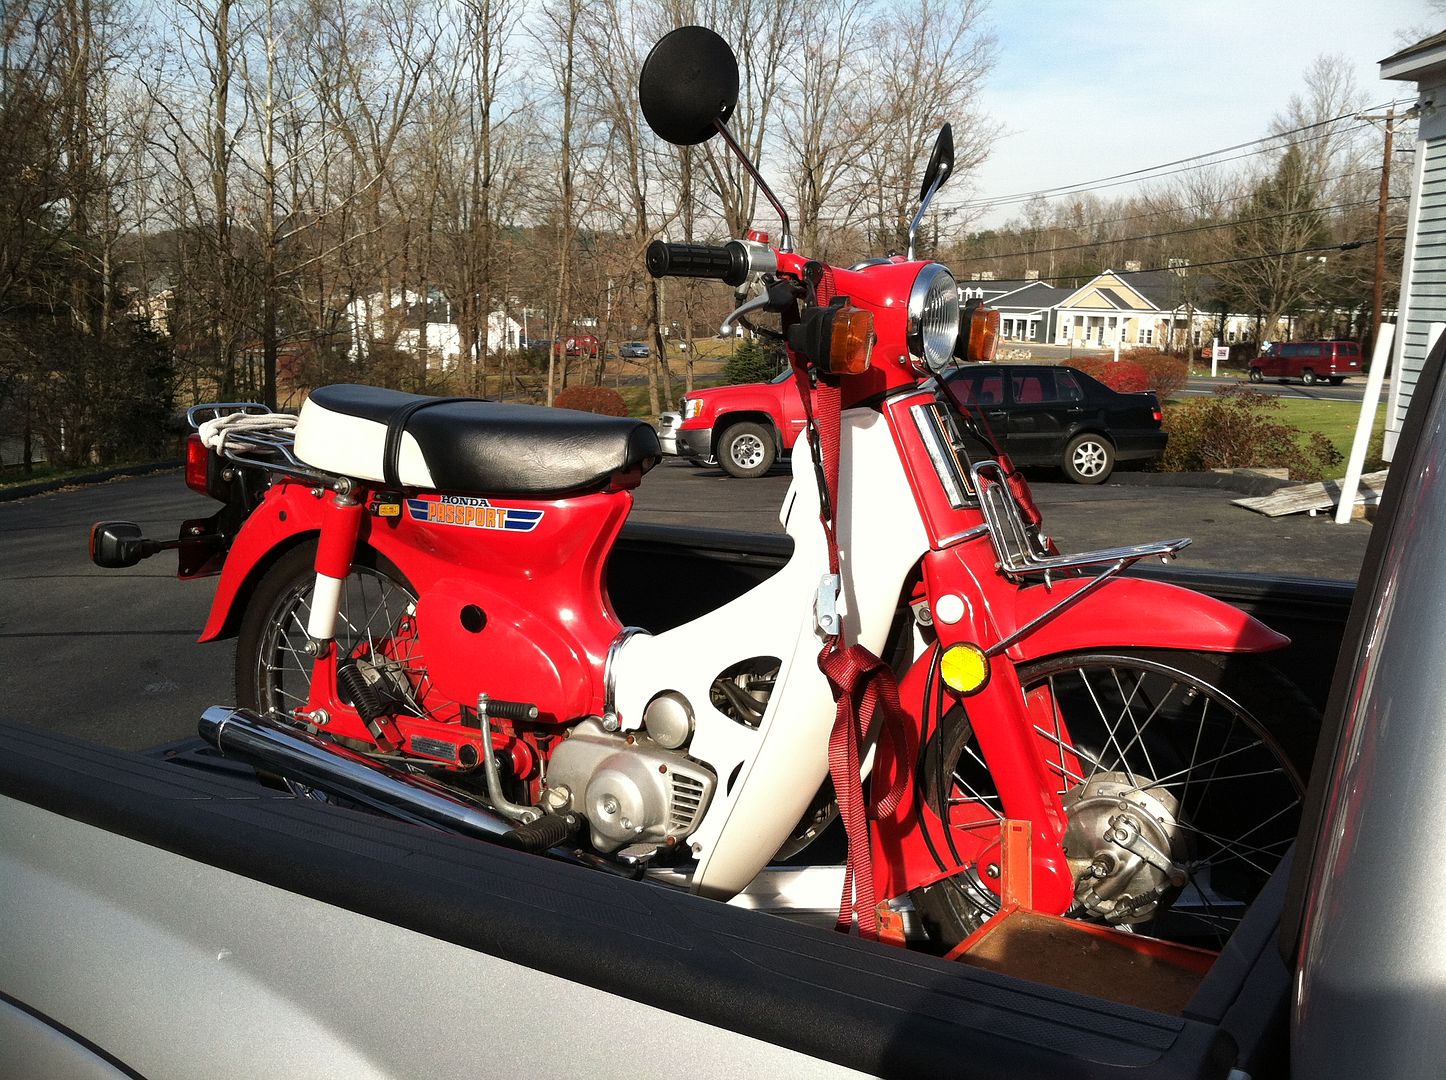 1981 Honda C70 Passport Builds And Project Cars Forum